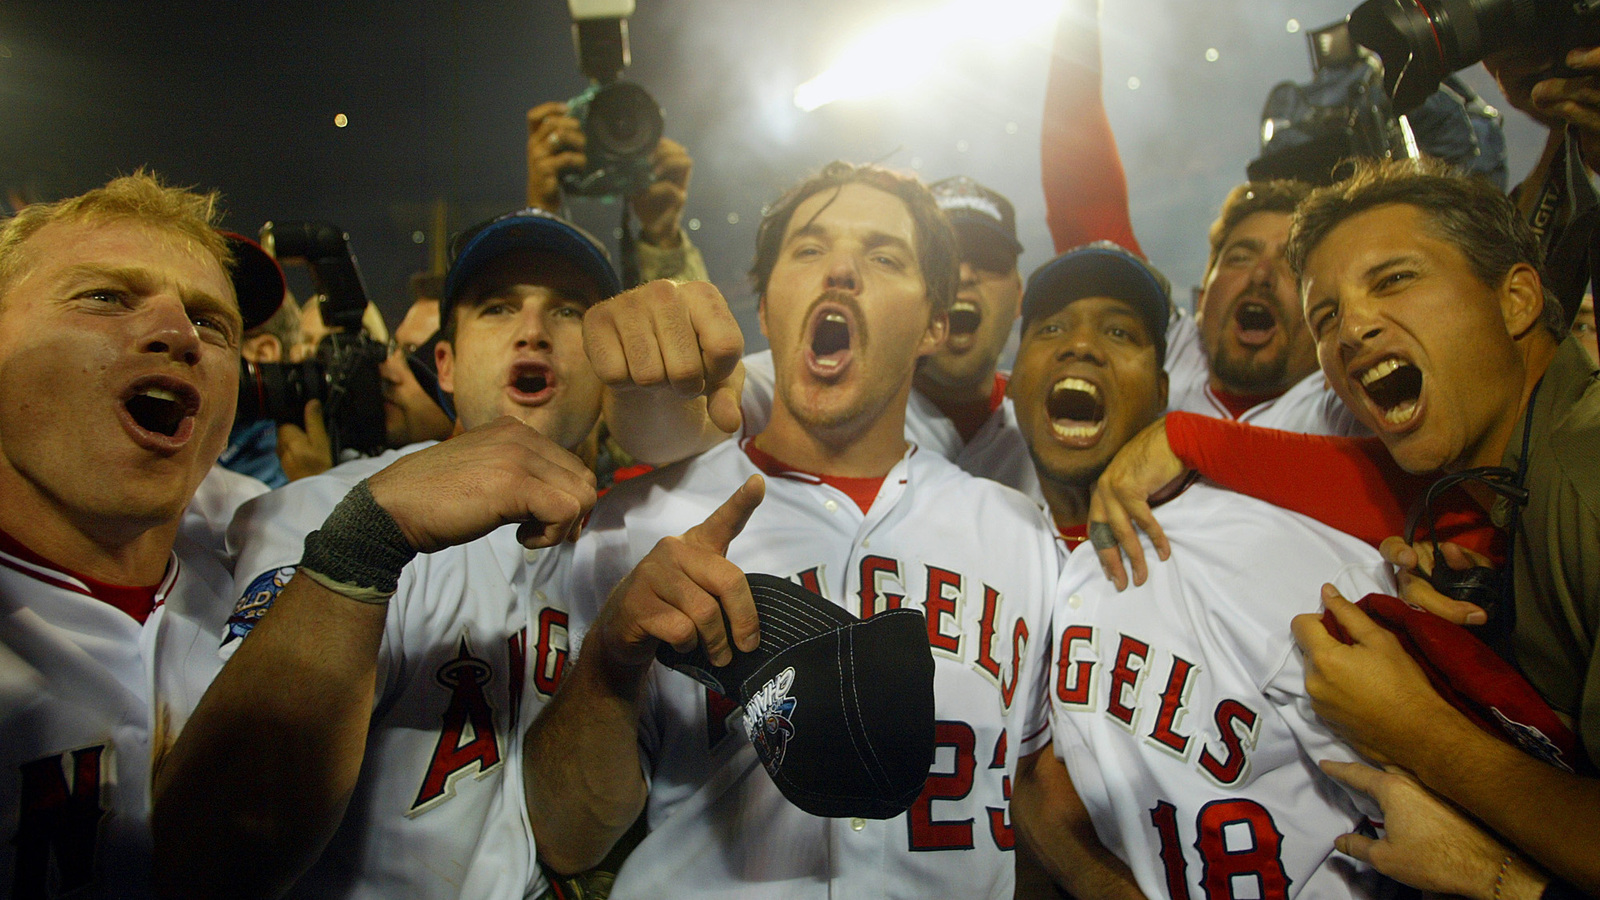 Late Post] '02 Angels World Series Champions wallpapers!!! : r